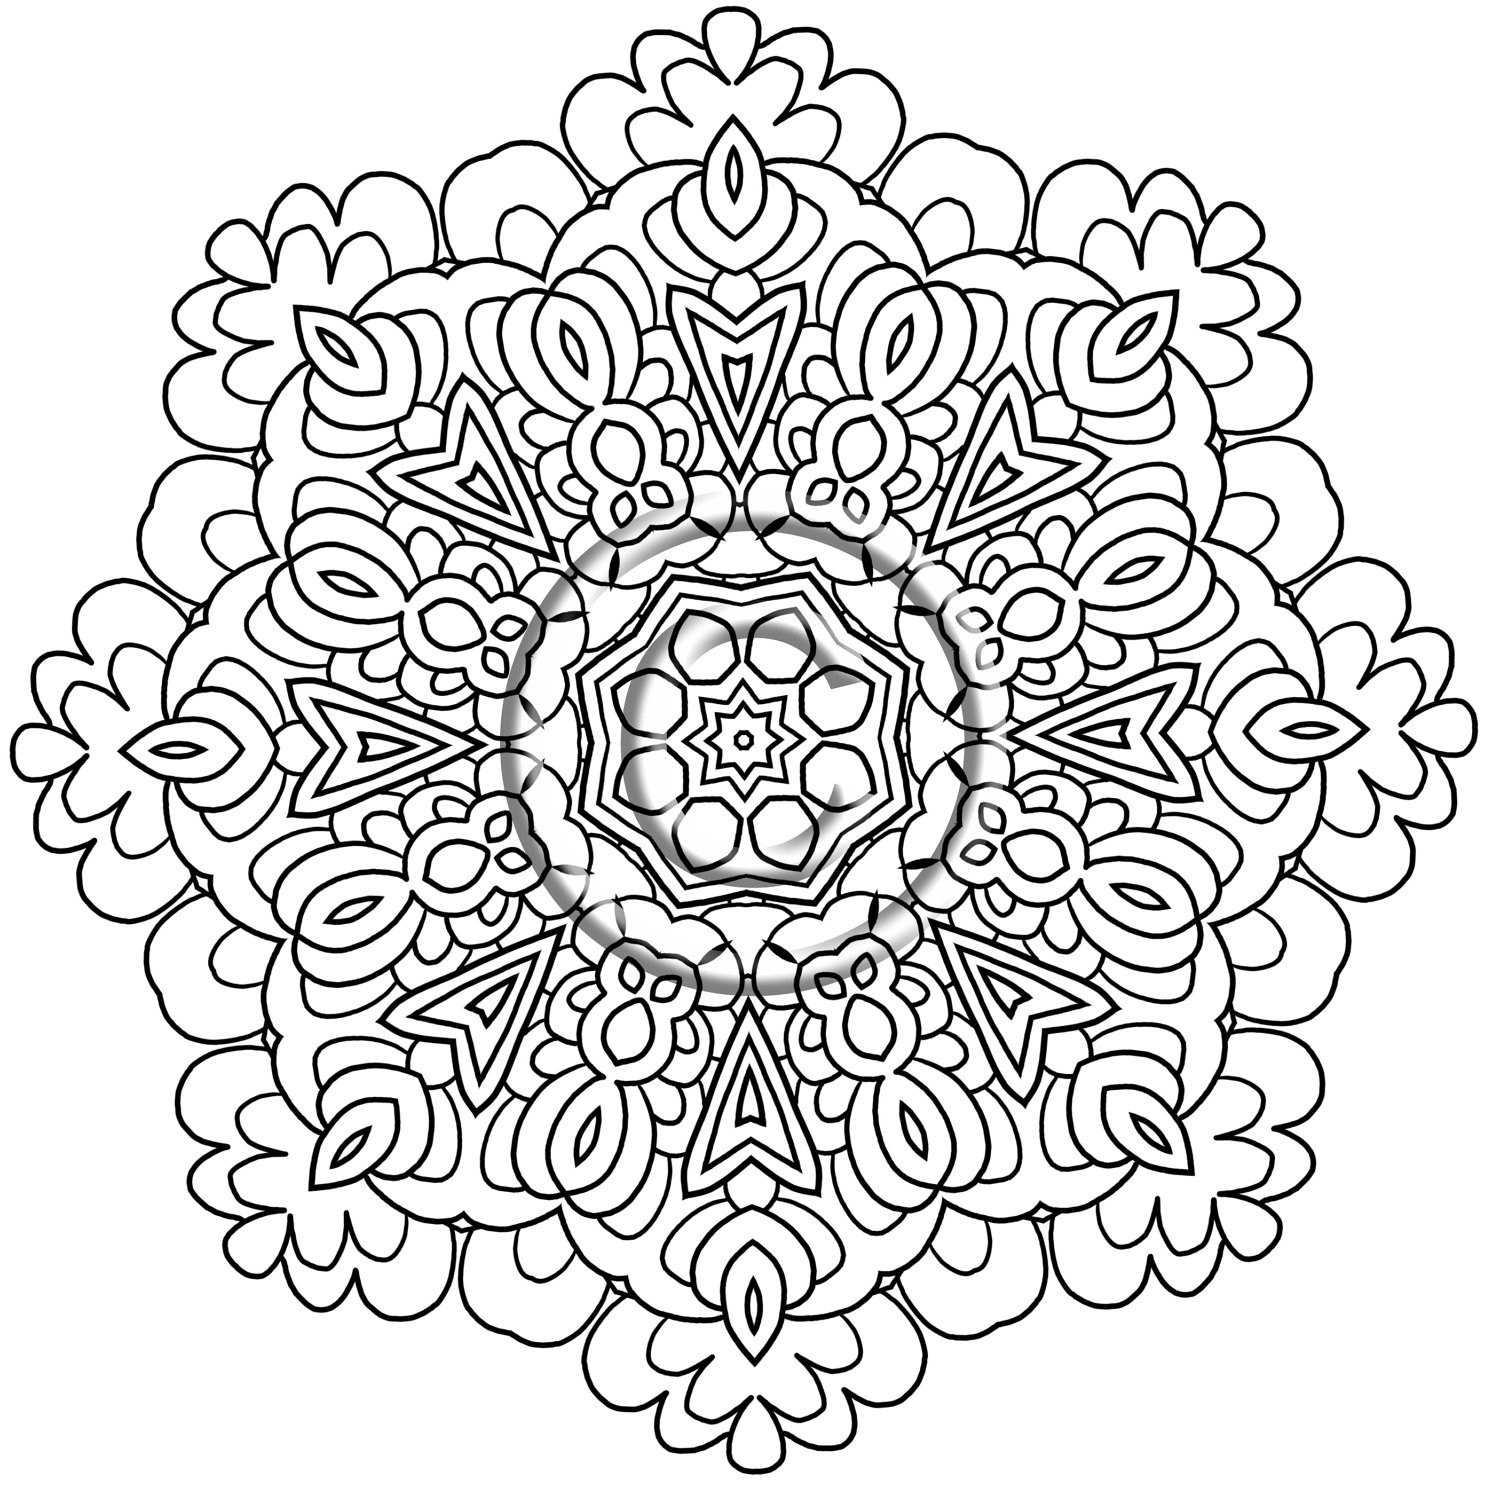 Printable Kaleidoscope Coloring Pages For Teens
 Flower Mandala Coloring Pages coloringsuite